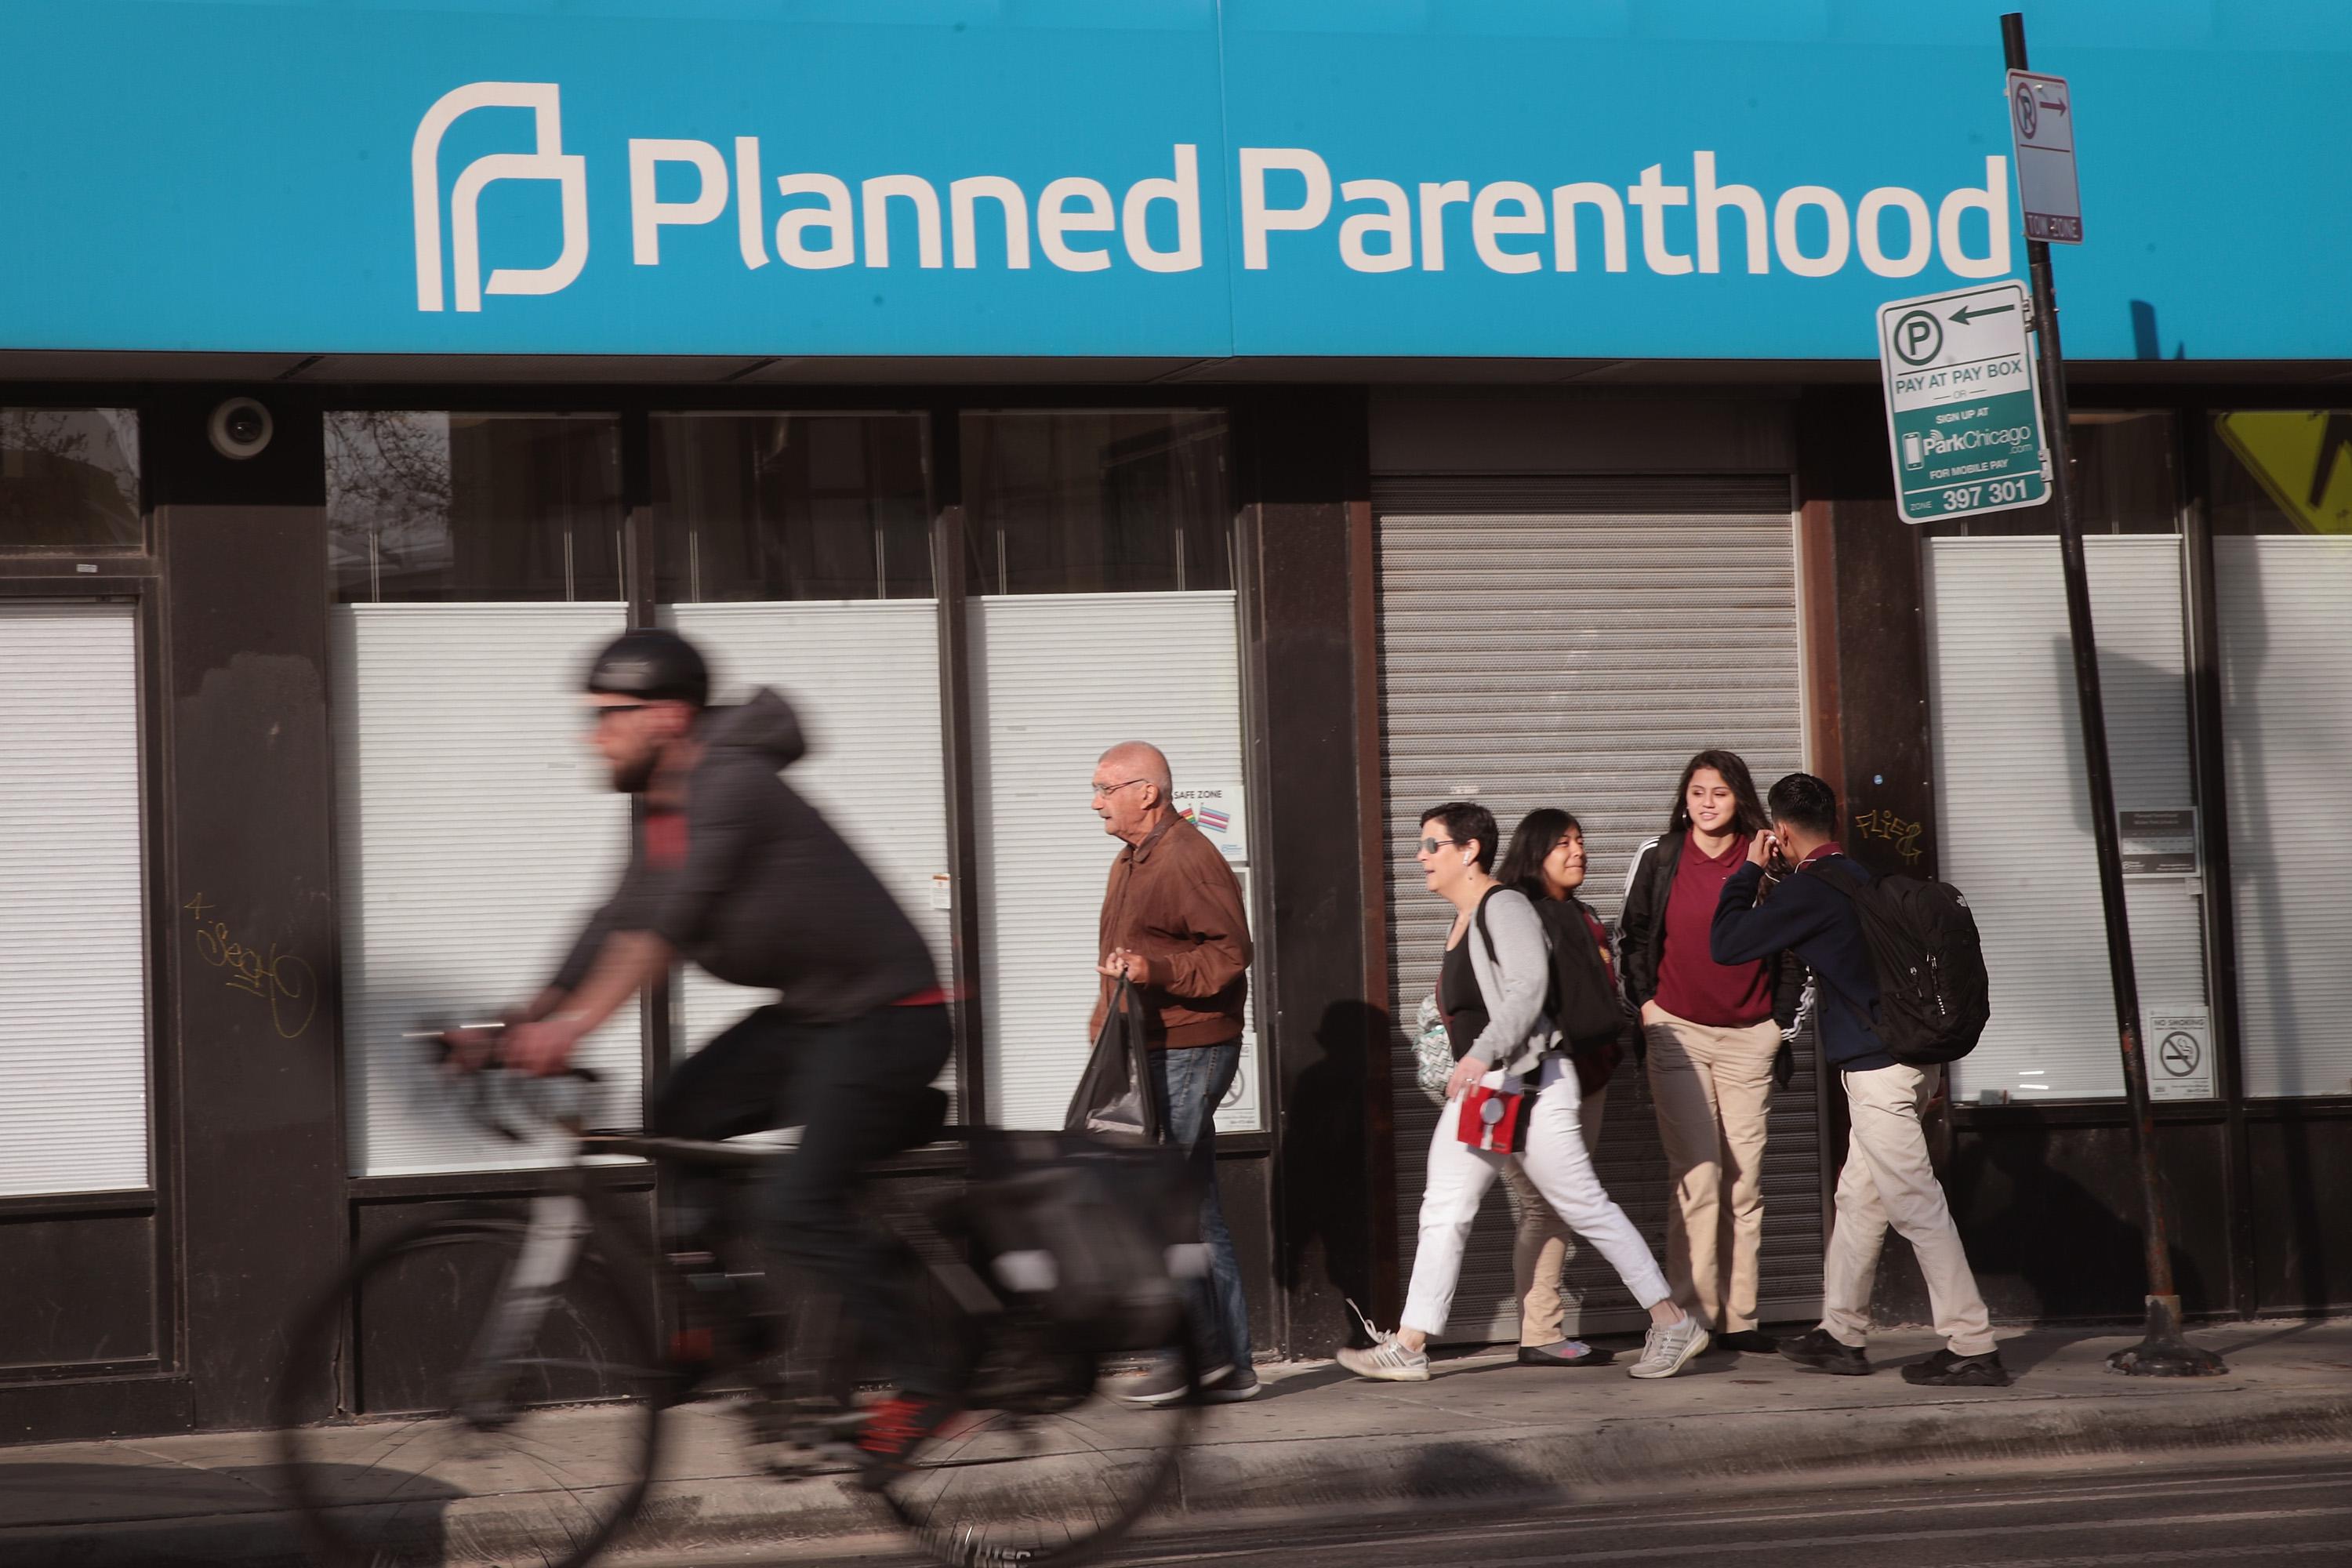 Pedestrians and a cyclist move past a Planned Parenthood awning on a building.